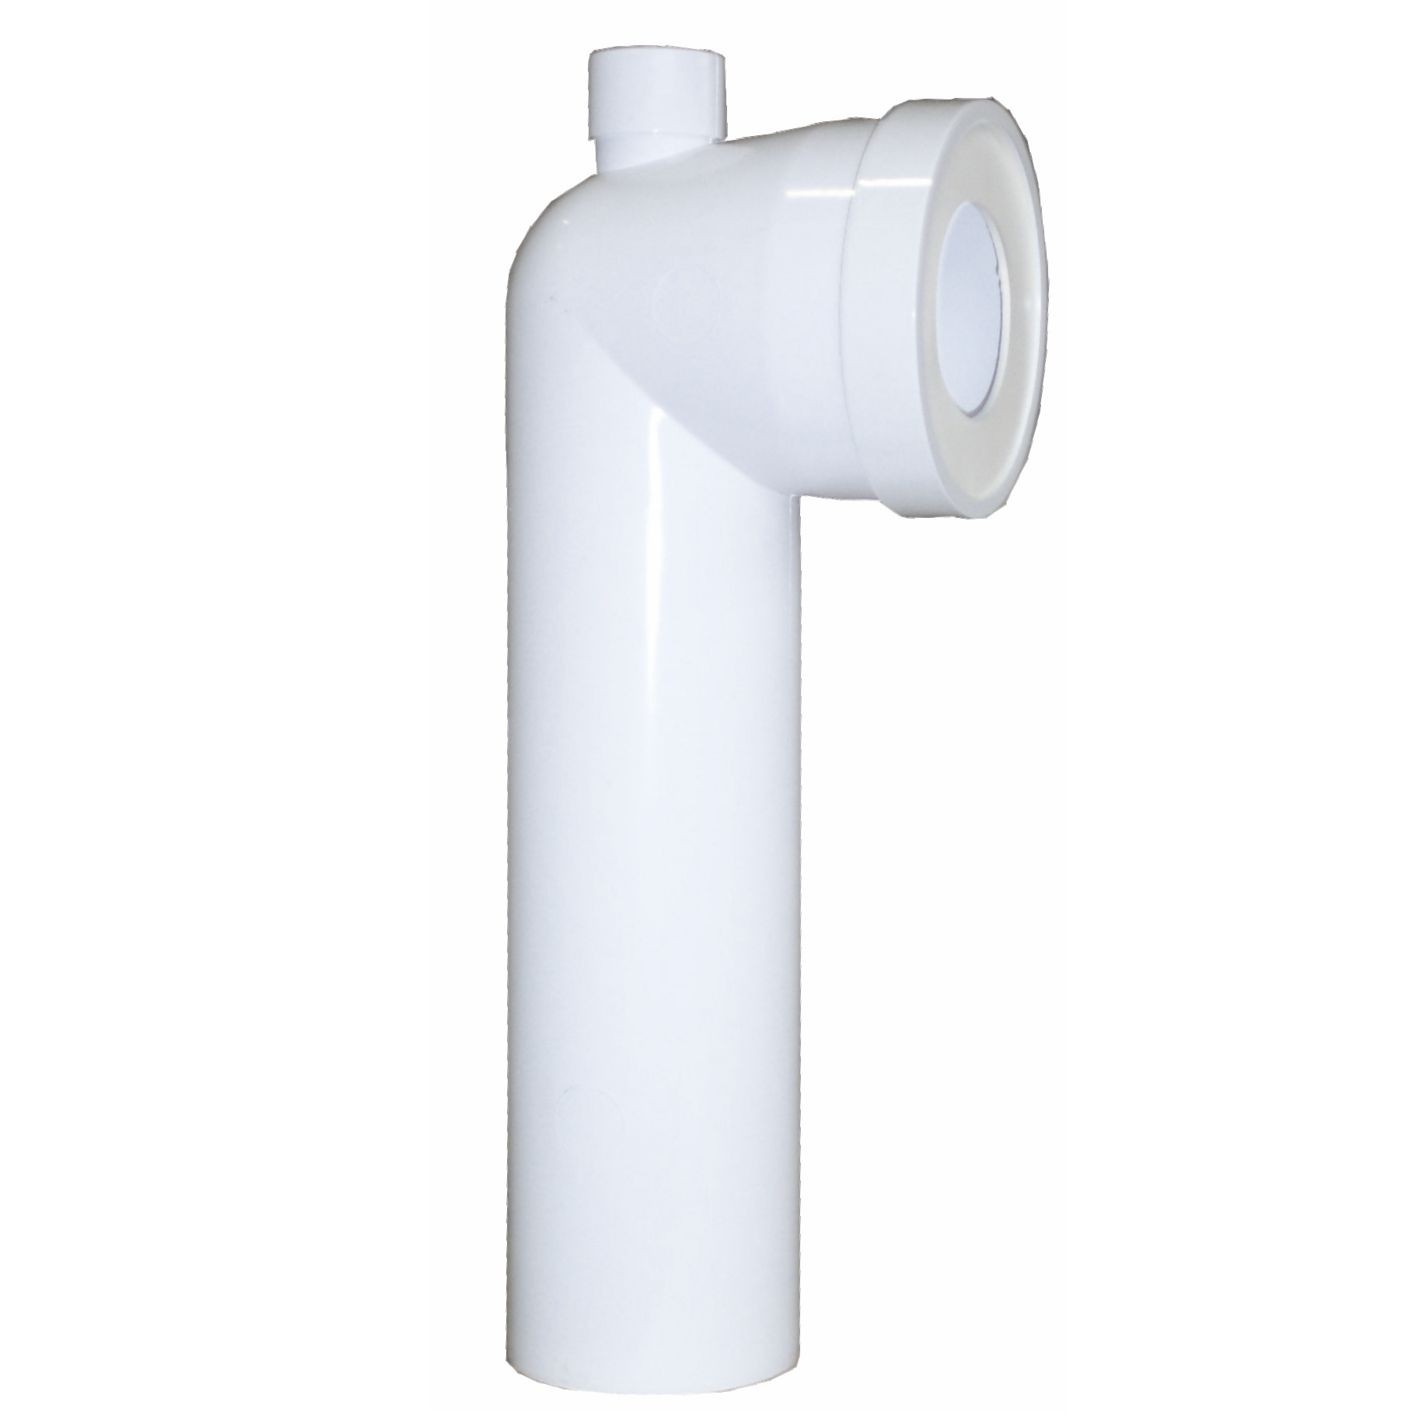 90 degree WC elbow Male diameter 100 with spigot on top